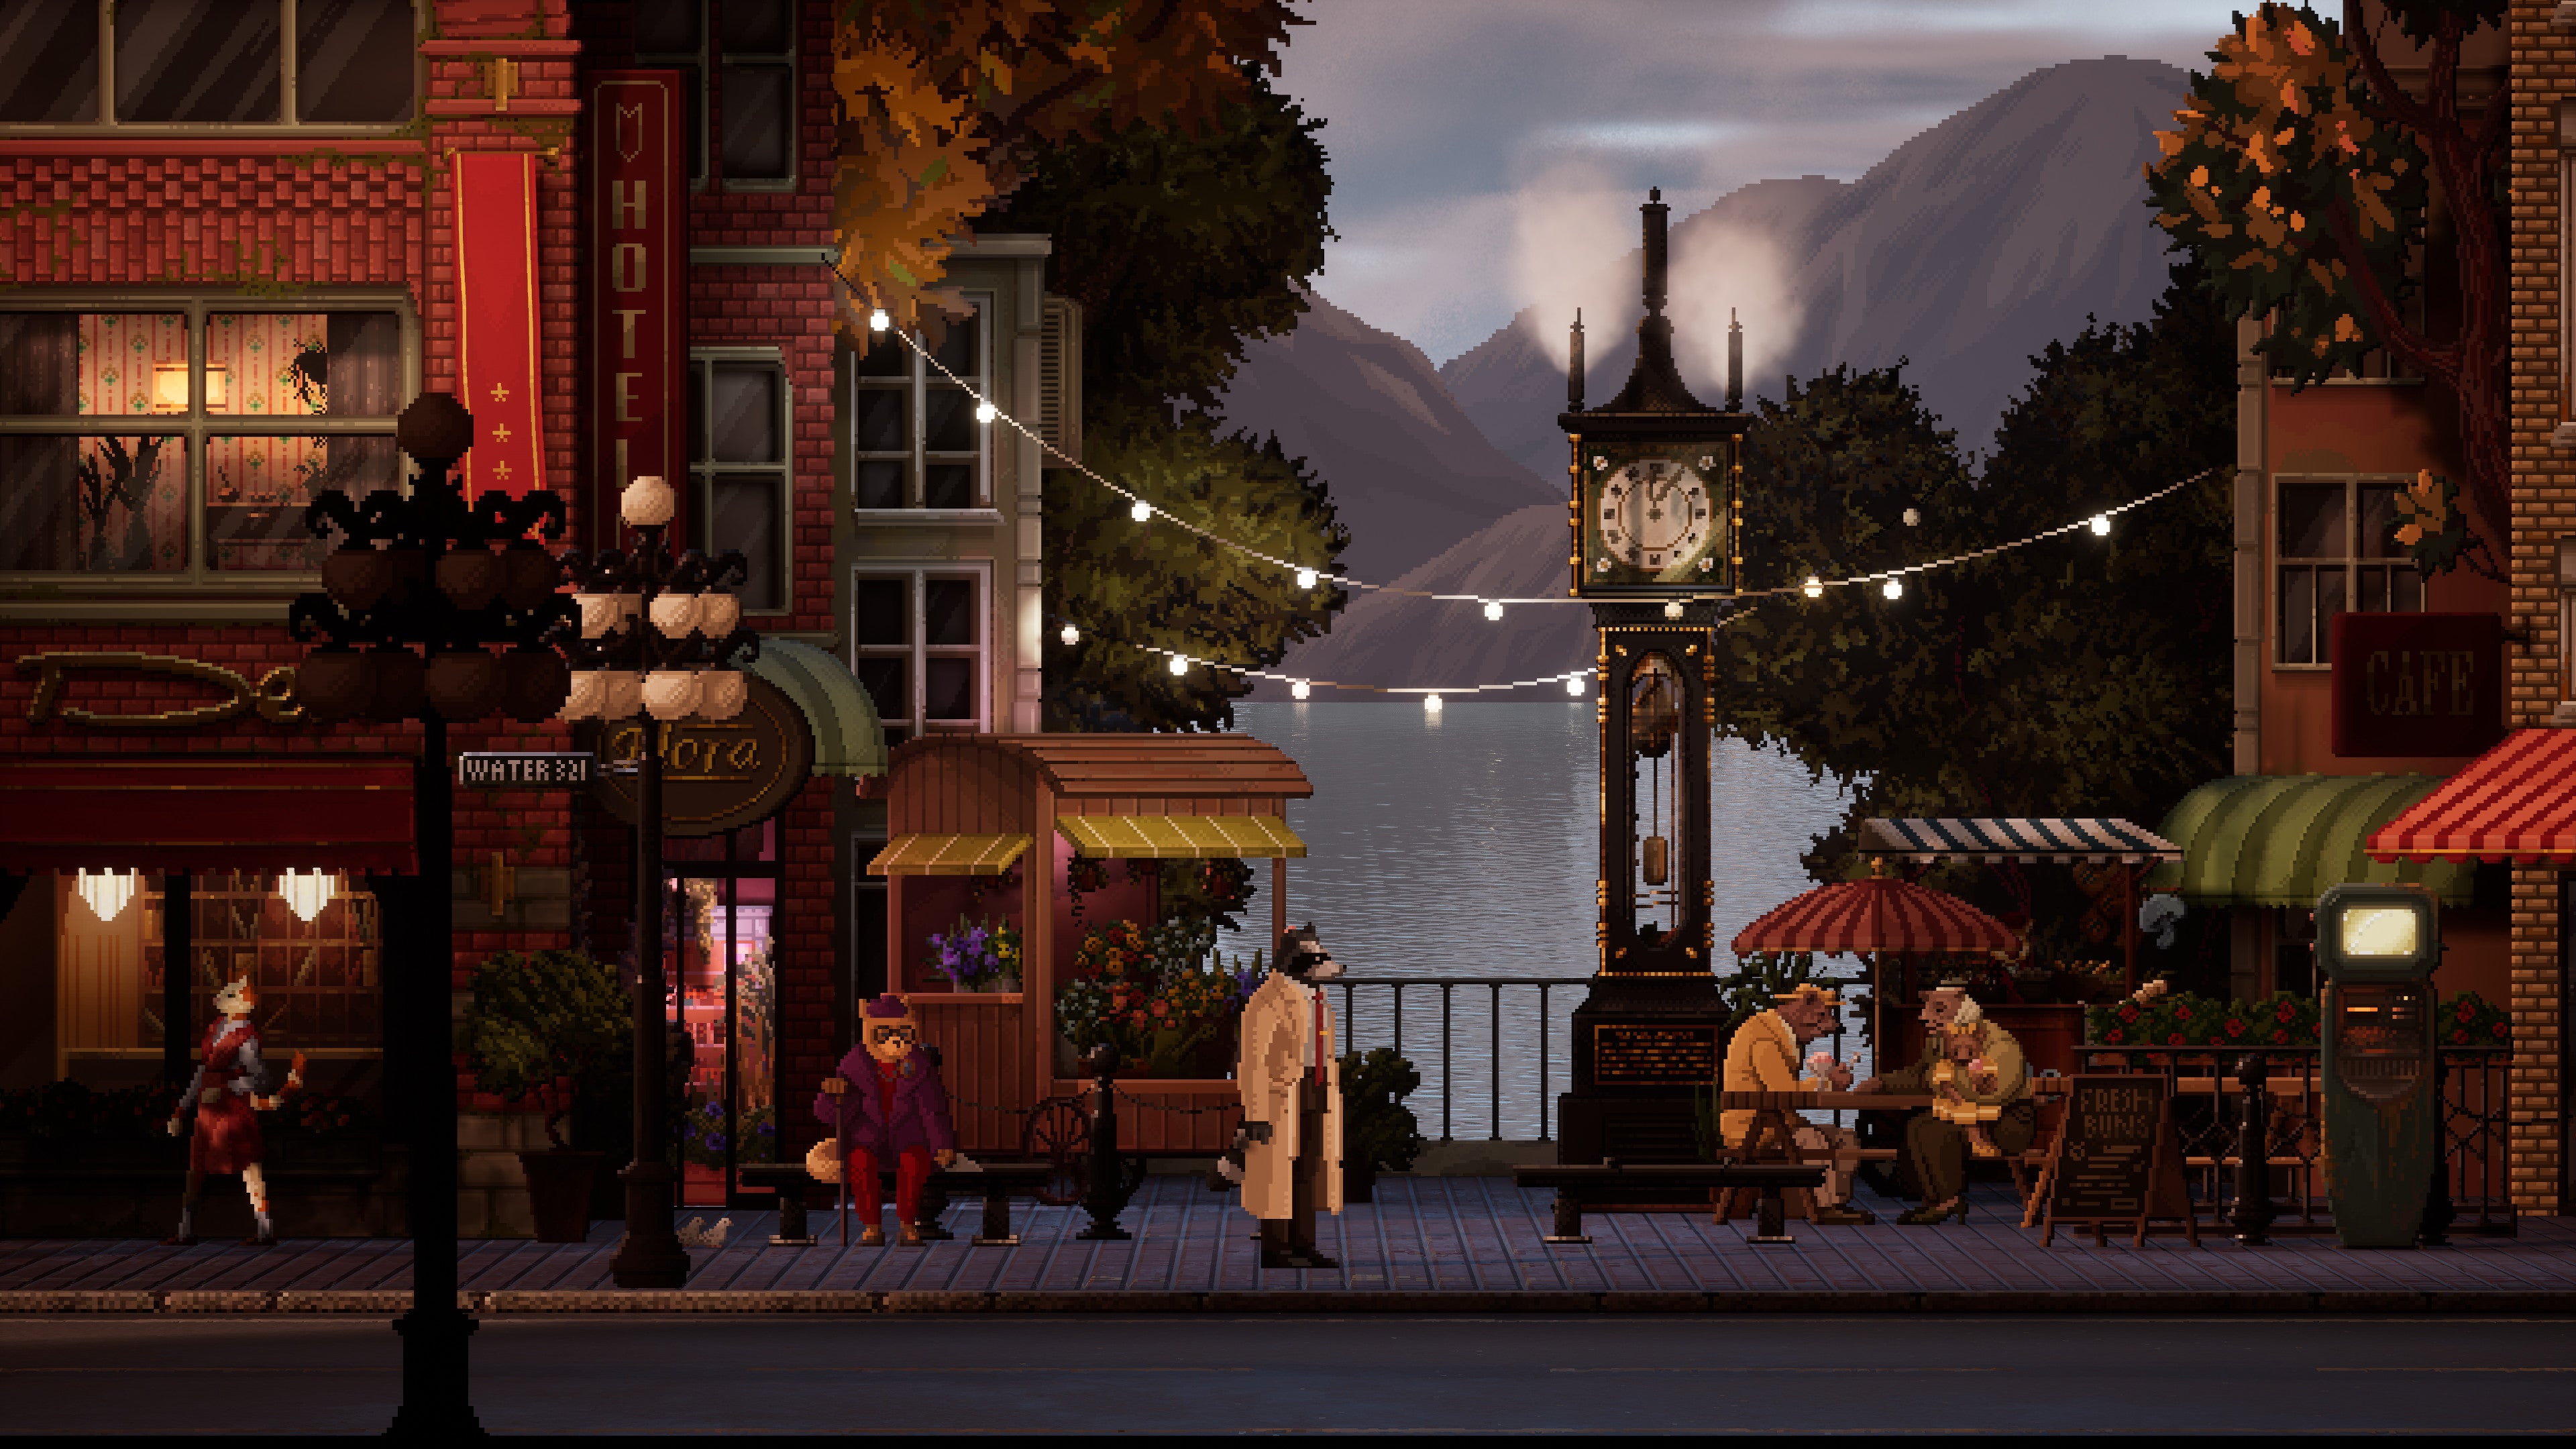 Backbone - Howard the raccoon detective stands on the sidewalk of a city block overlooking the water. Nearby are a flower cart, other animal people at a picnic bench, a gothic-style city clock, and string lights between buildings.